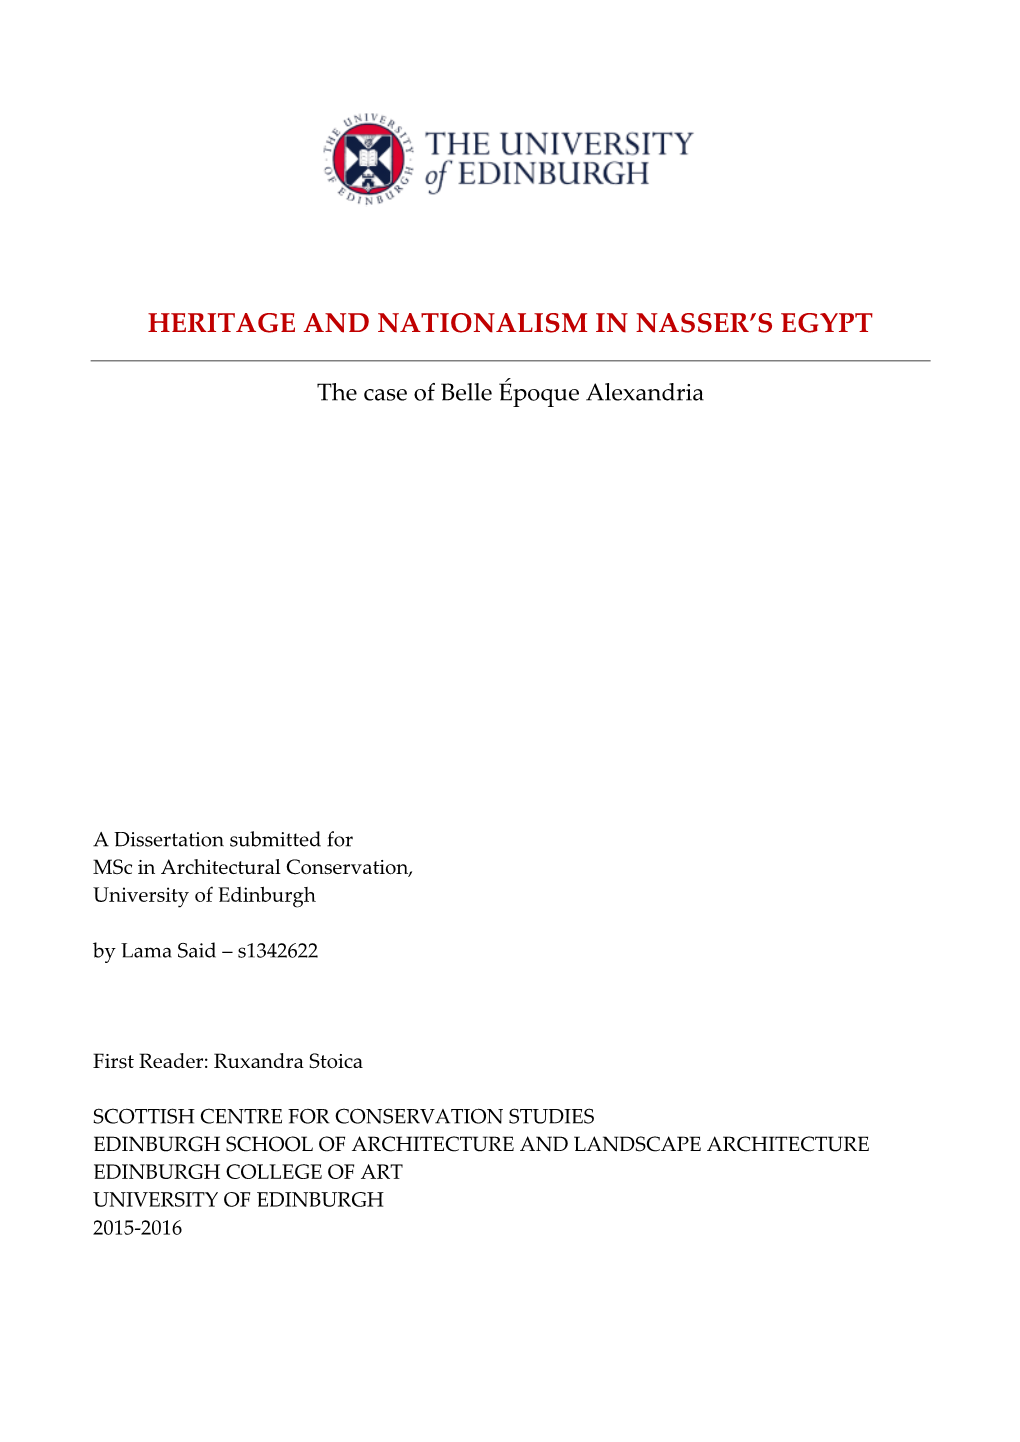 Heritage and Nationalism in Nasser's Egypt